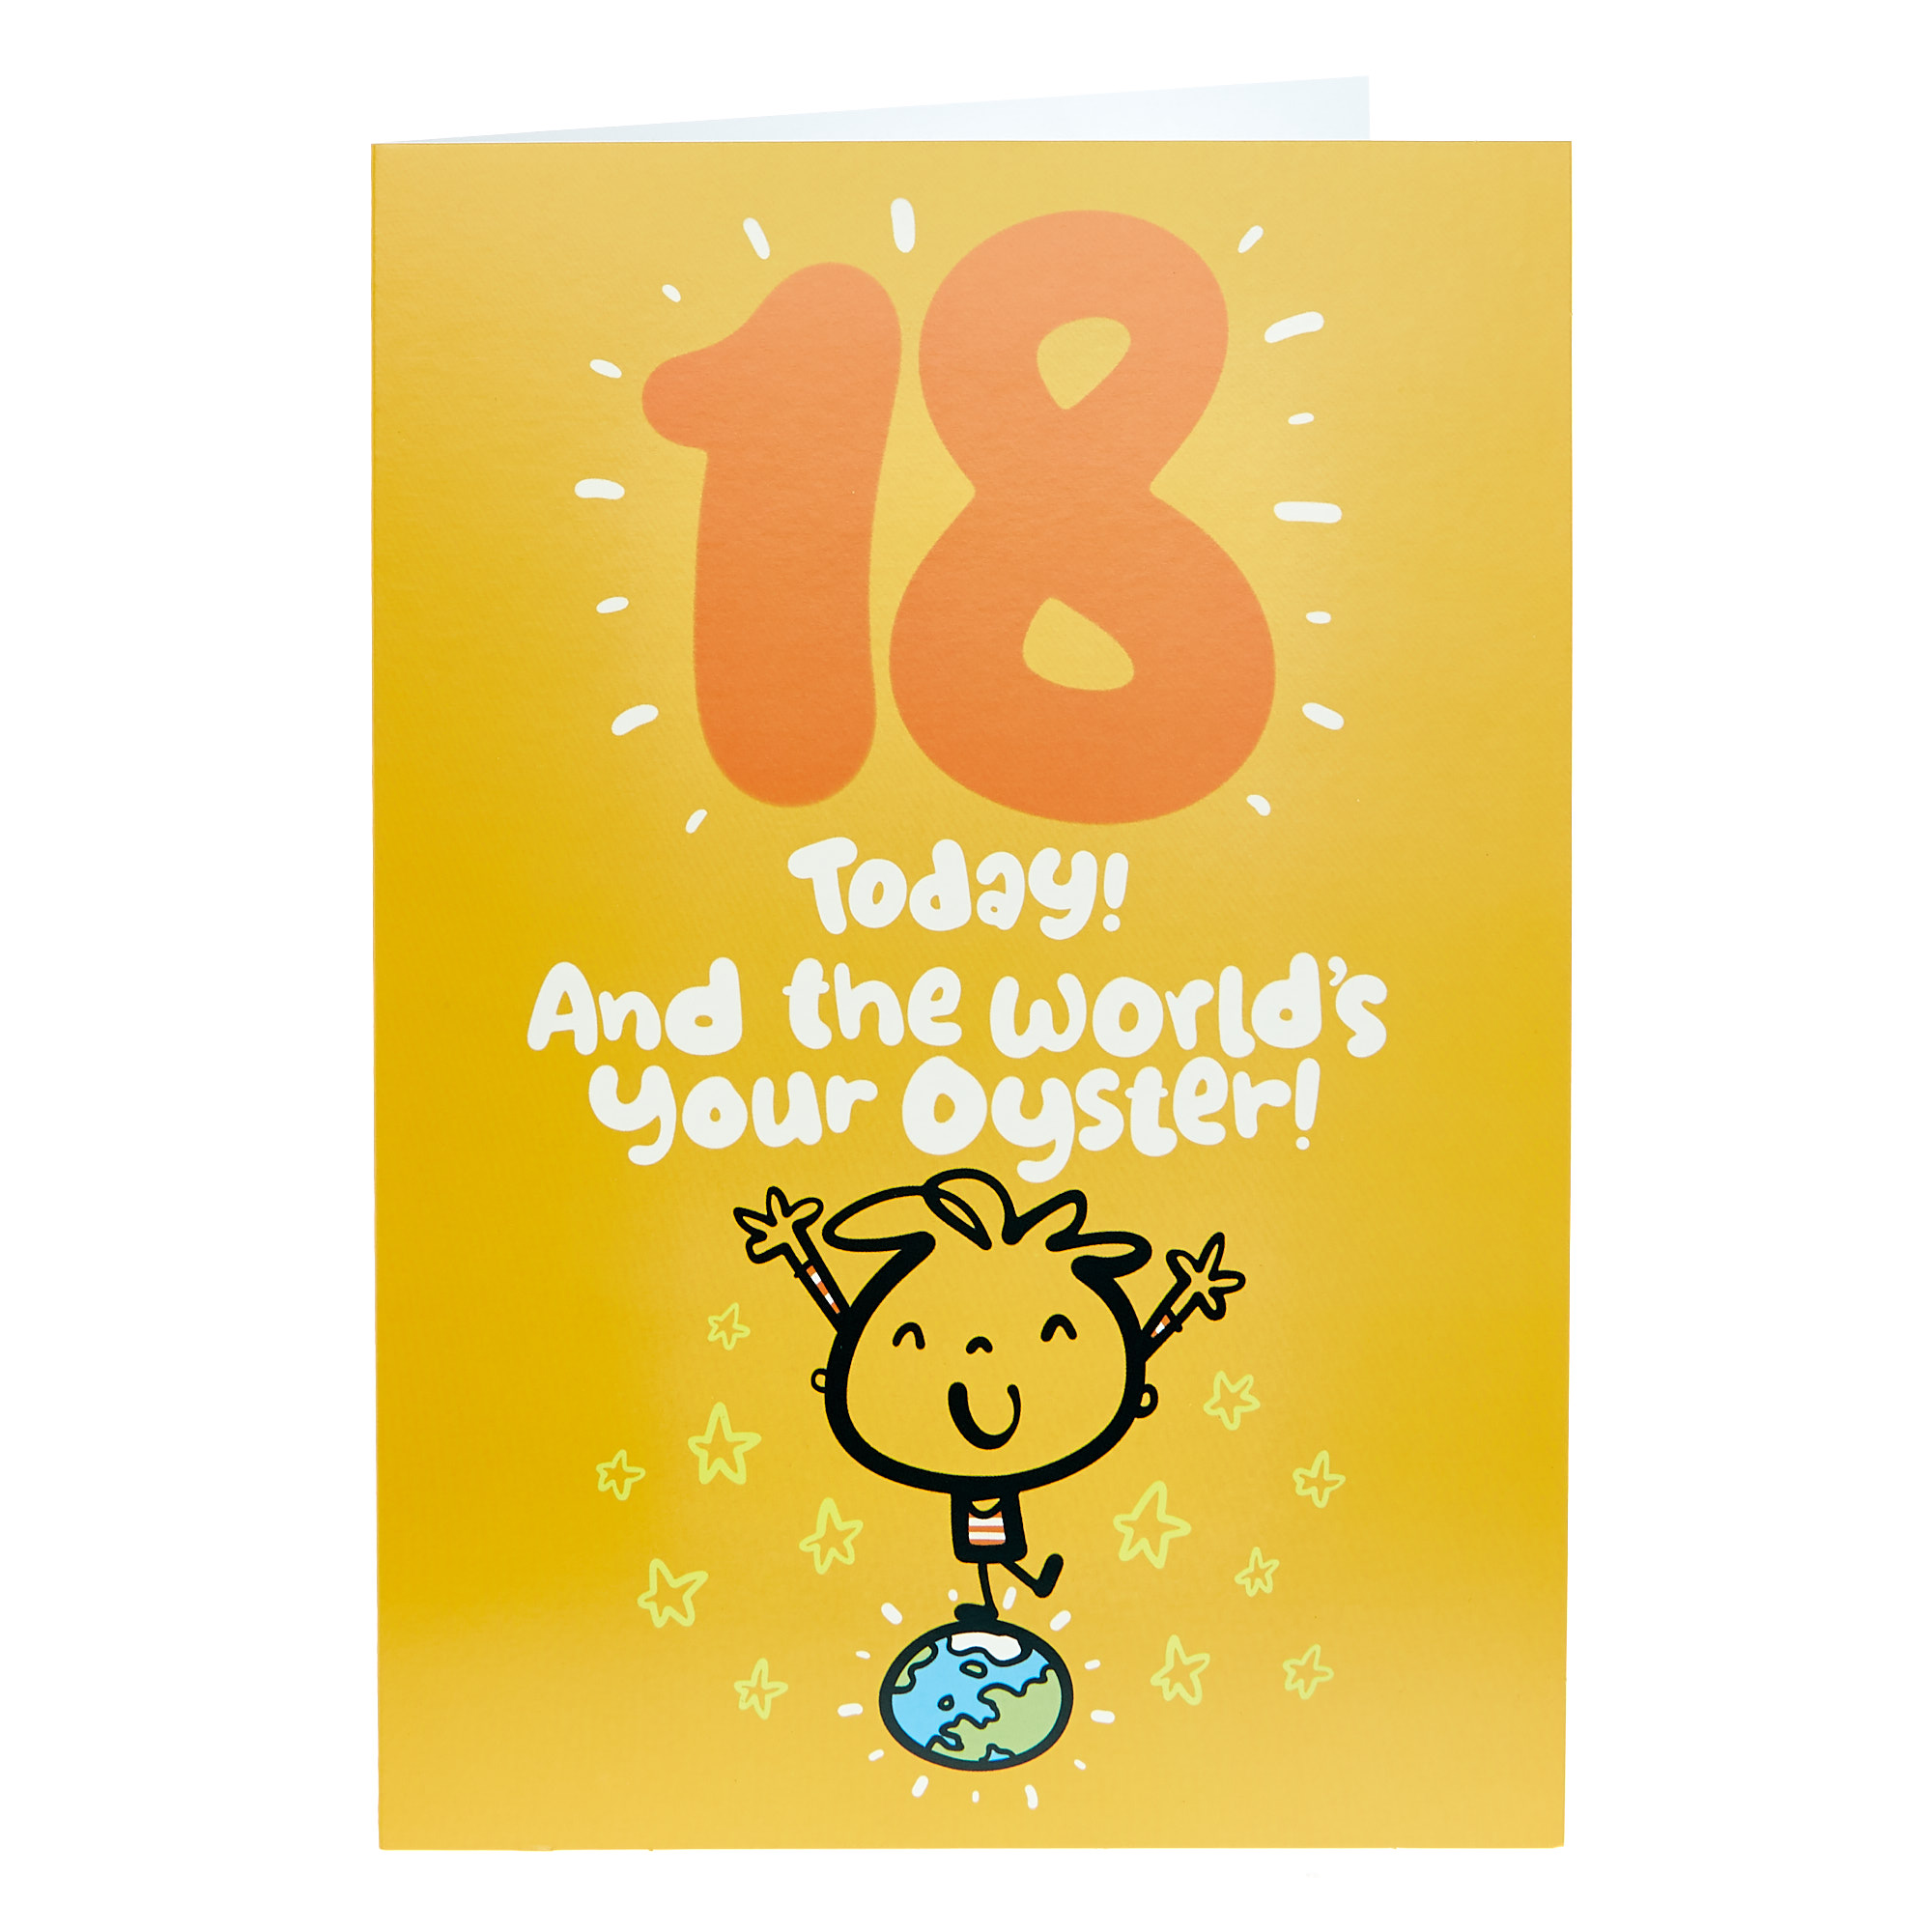 Buy Fruitloops 18th Birthday Card The Worlds Your Oyster For Gbp 099 Card Factory Uk 6834